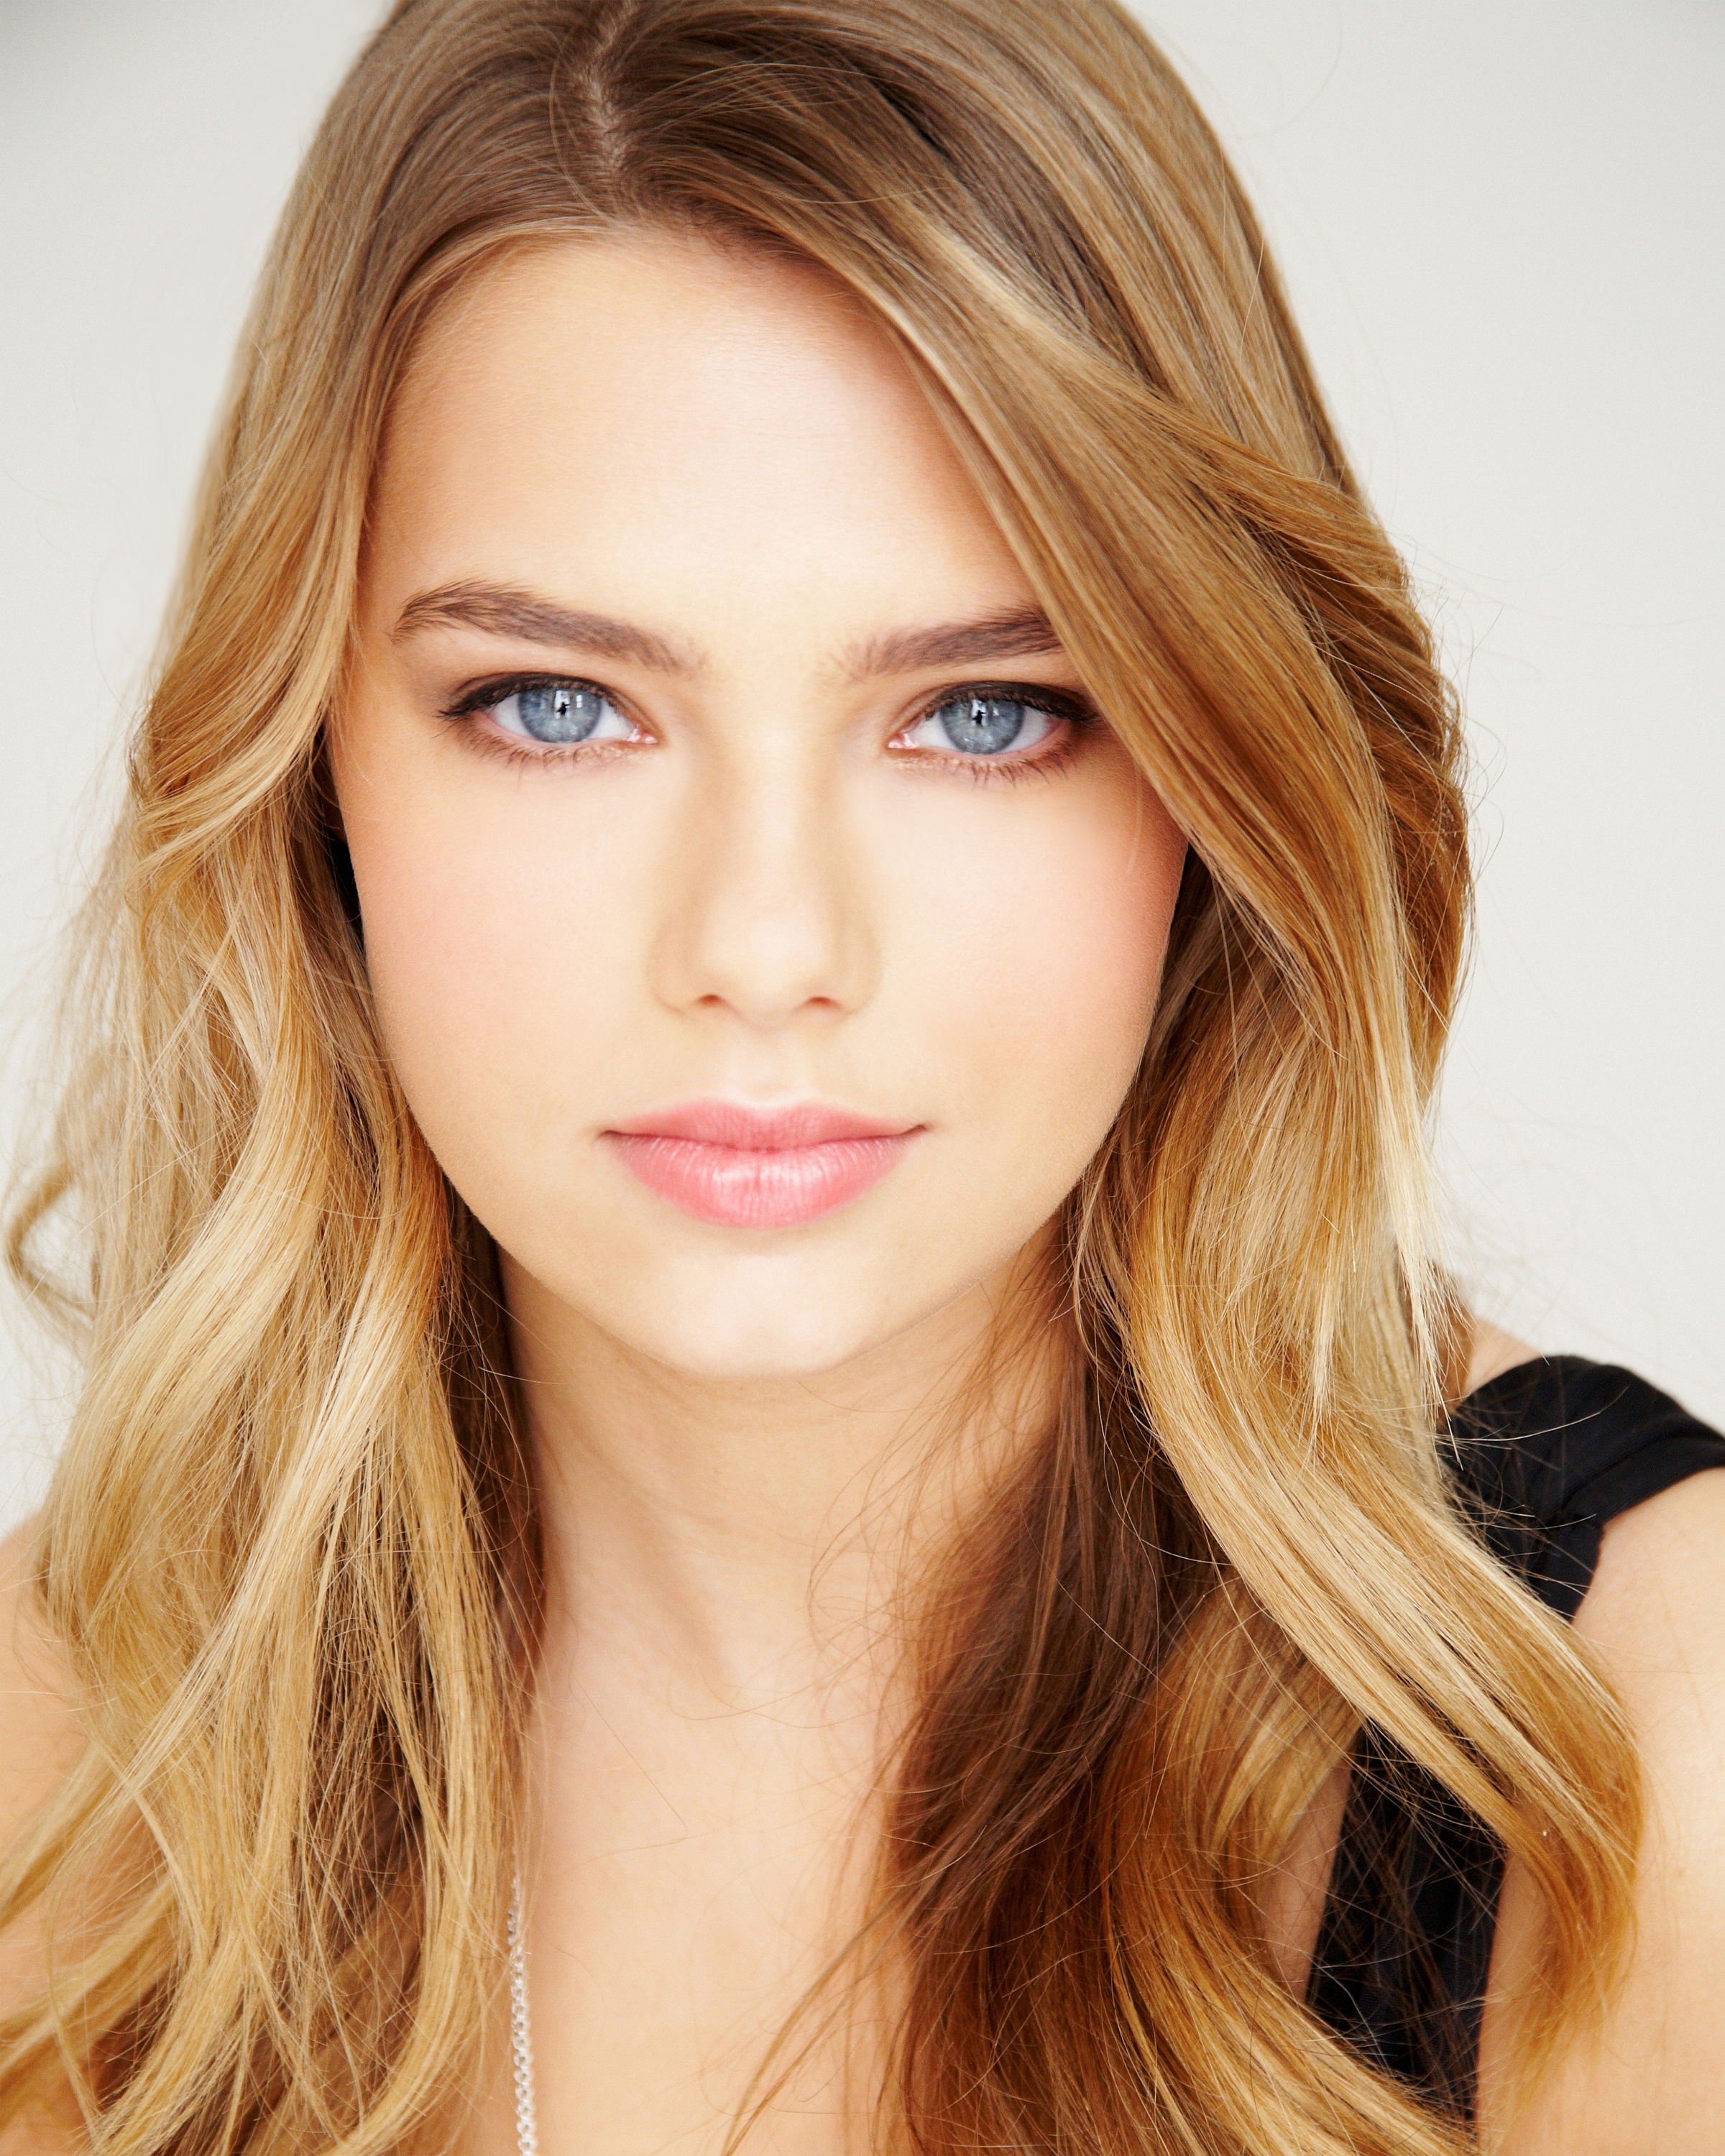 Indiana Evans Biography - Facts, Childhood, Family Life of 